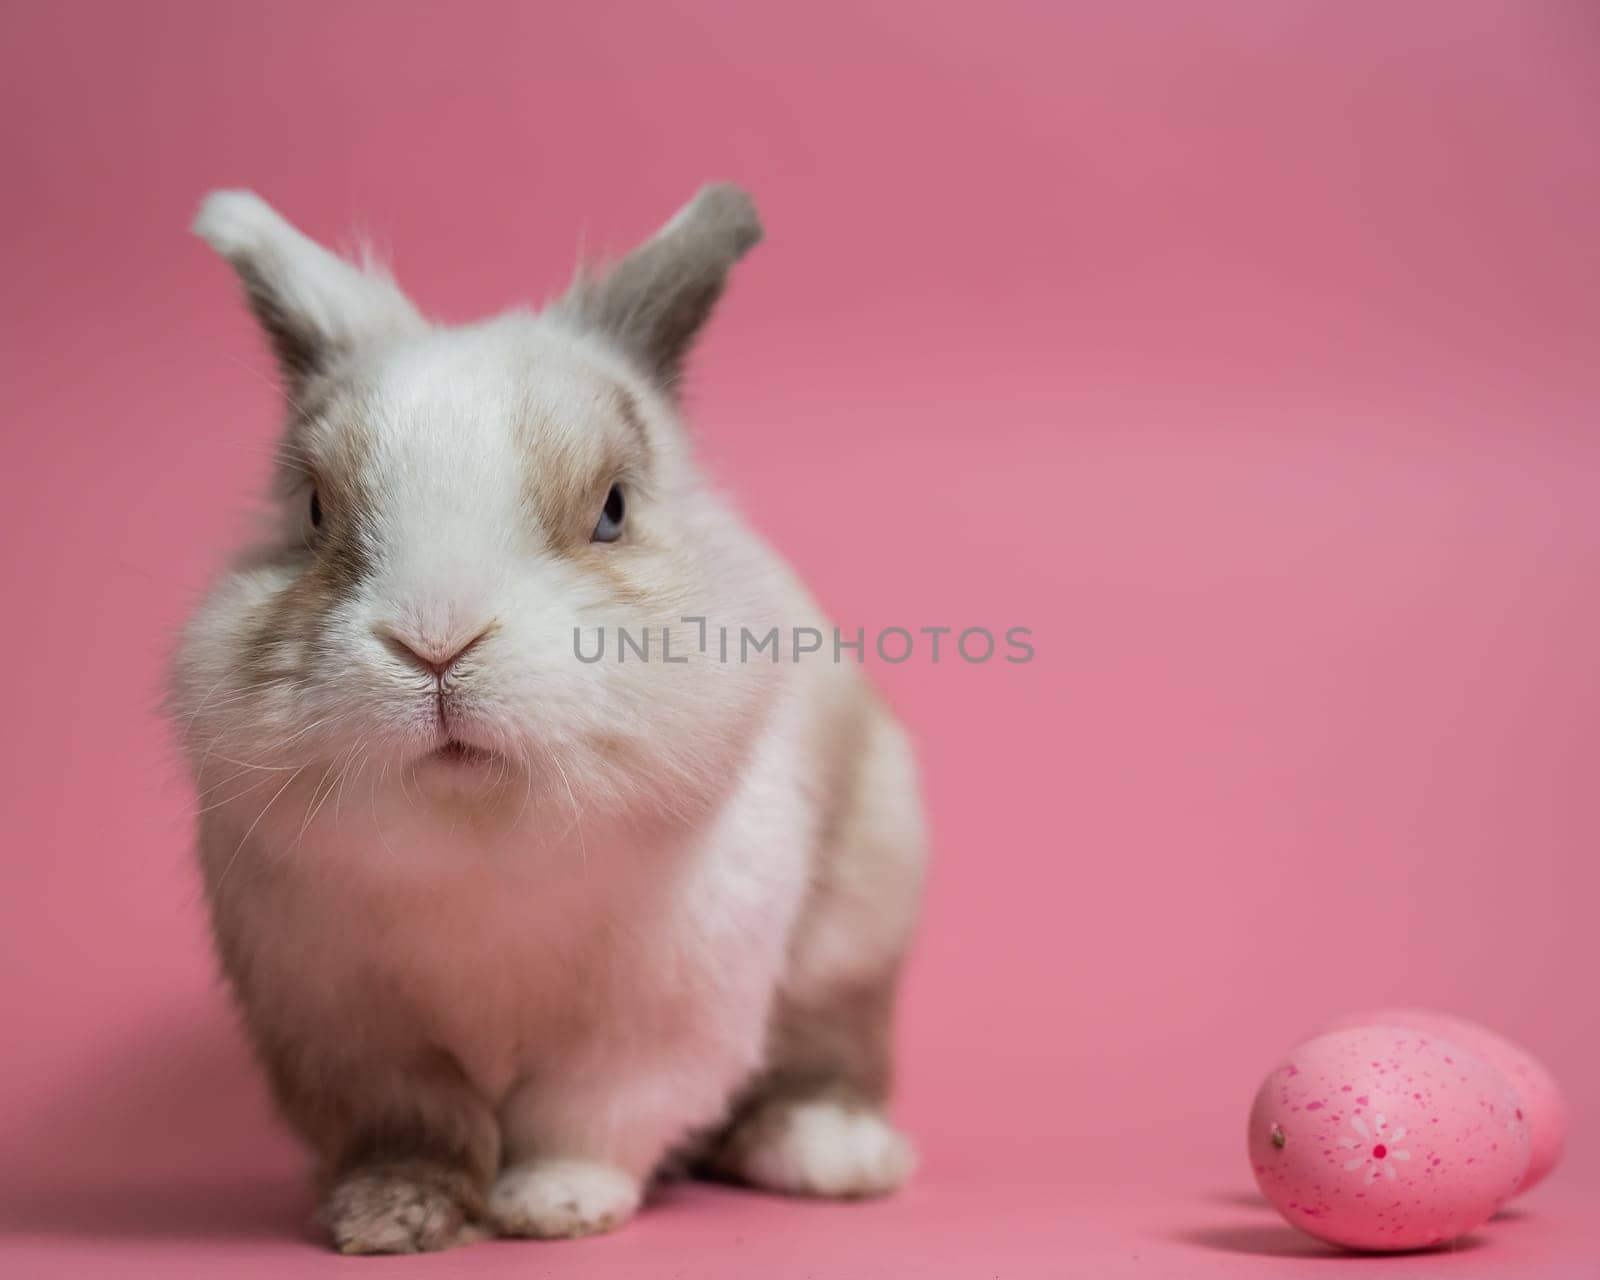 Easter Bunny on a pink background with a painted egg